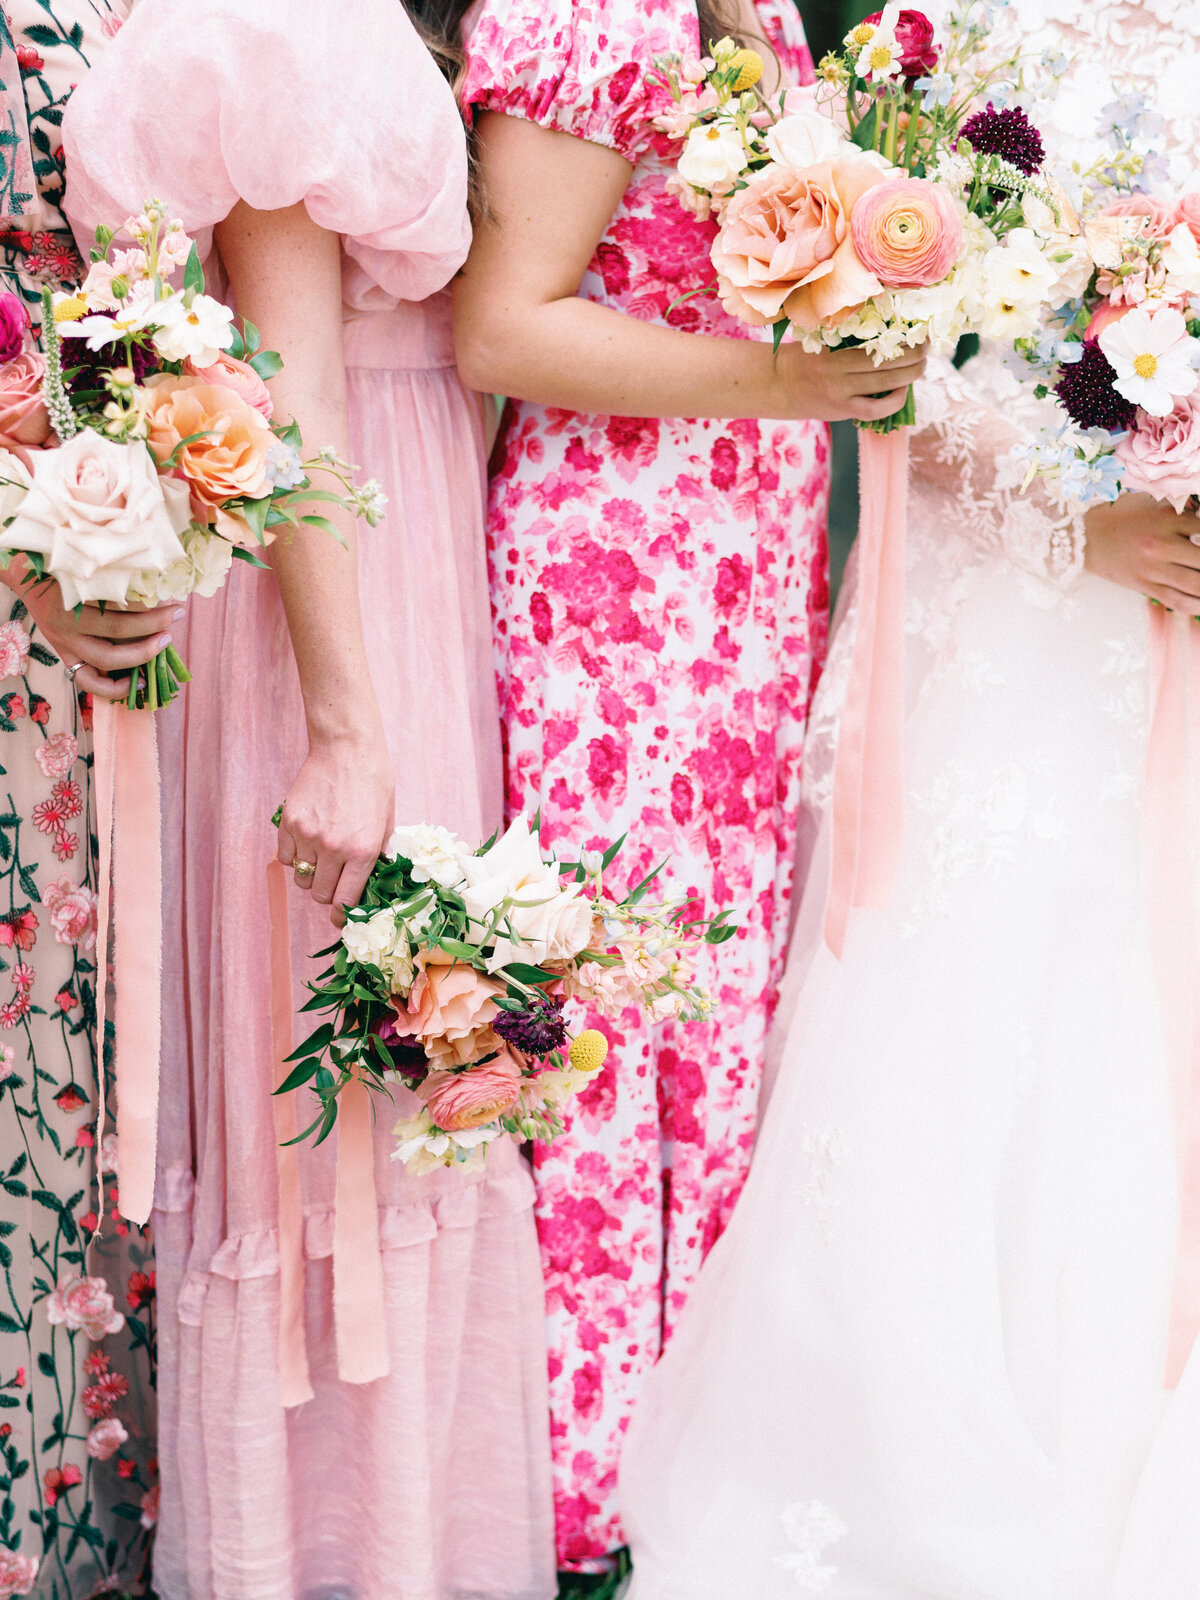 Garden party bridesmaids with colorful flowers and pink dresses